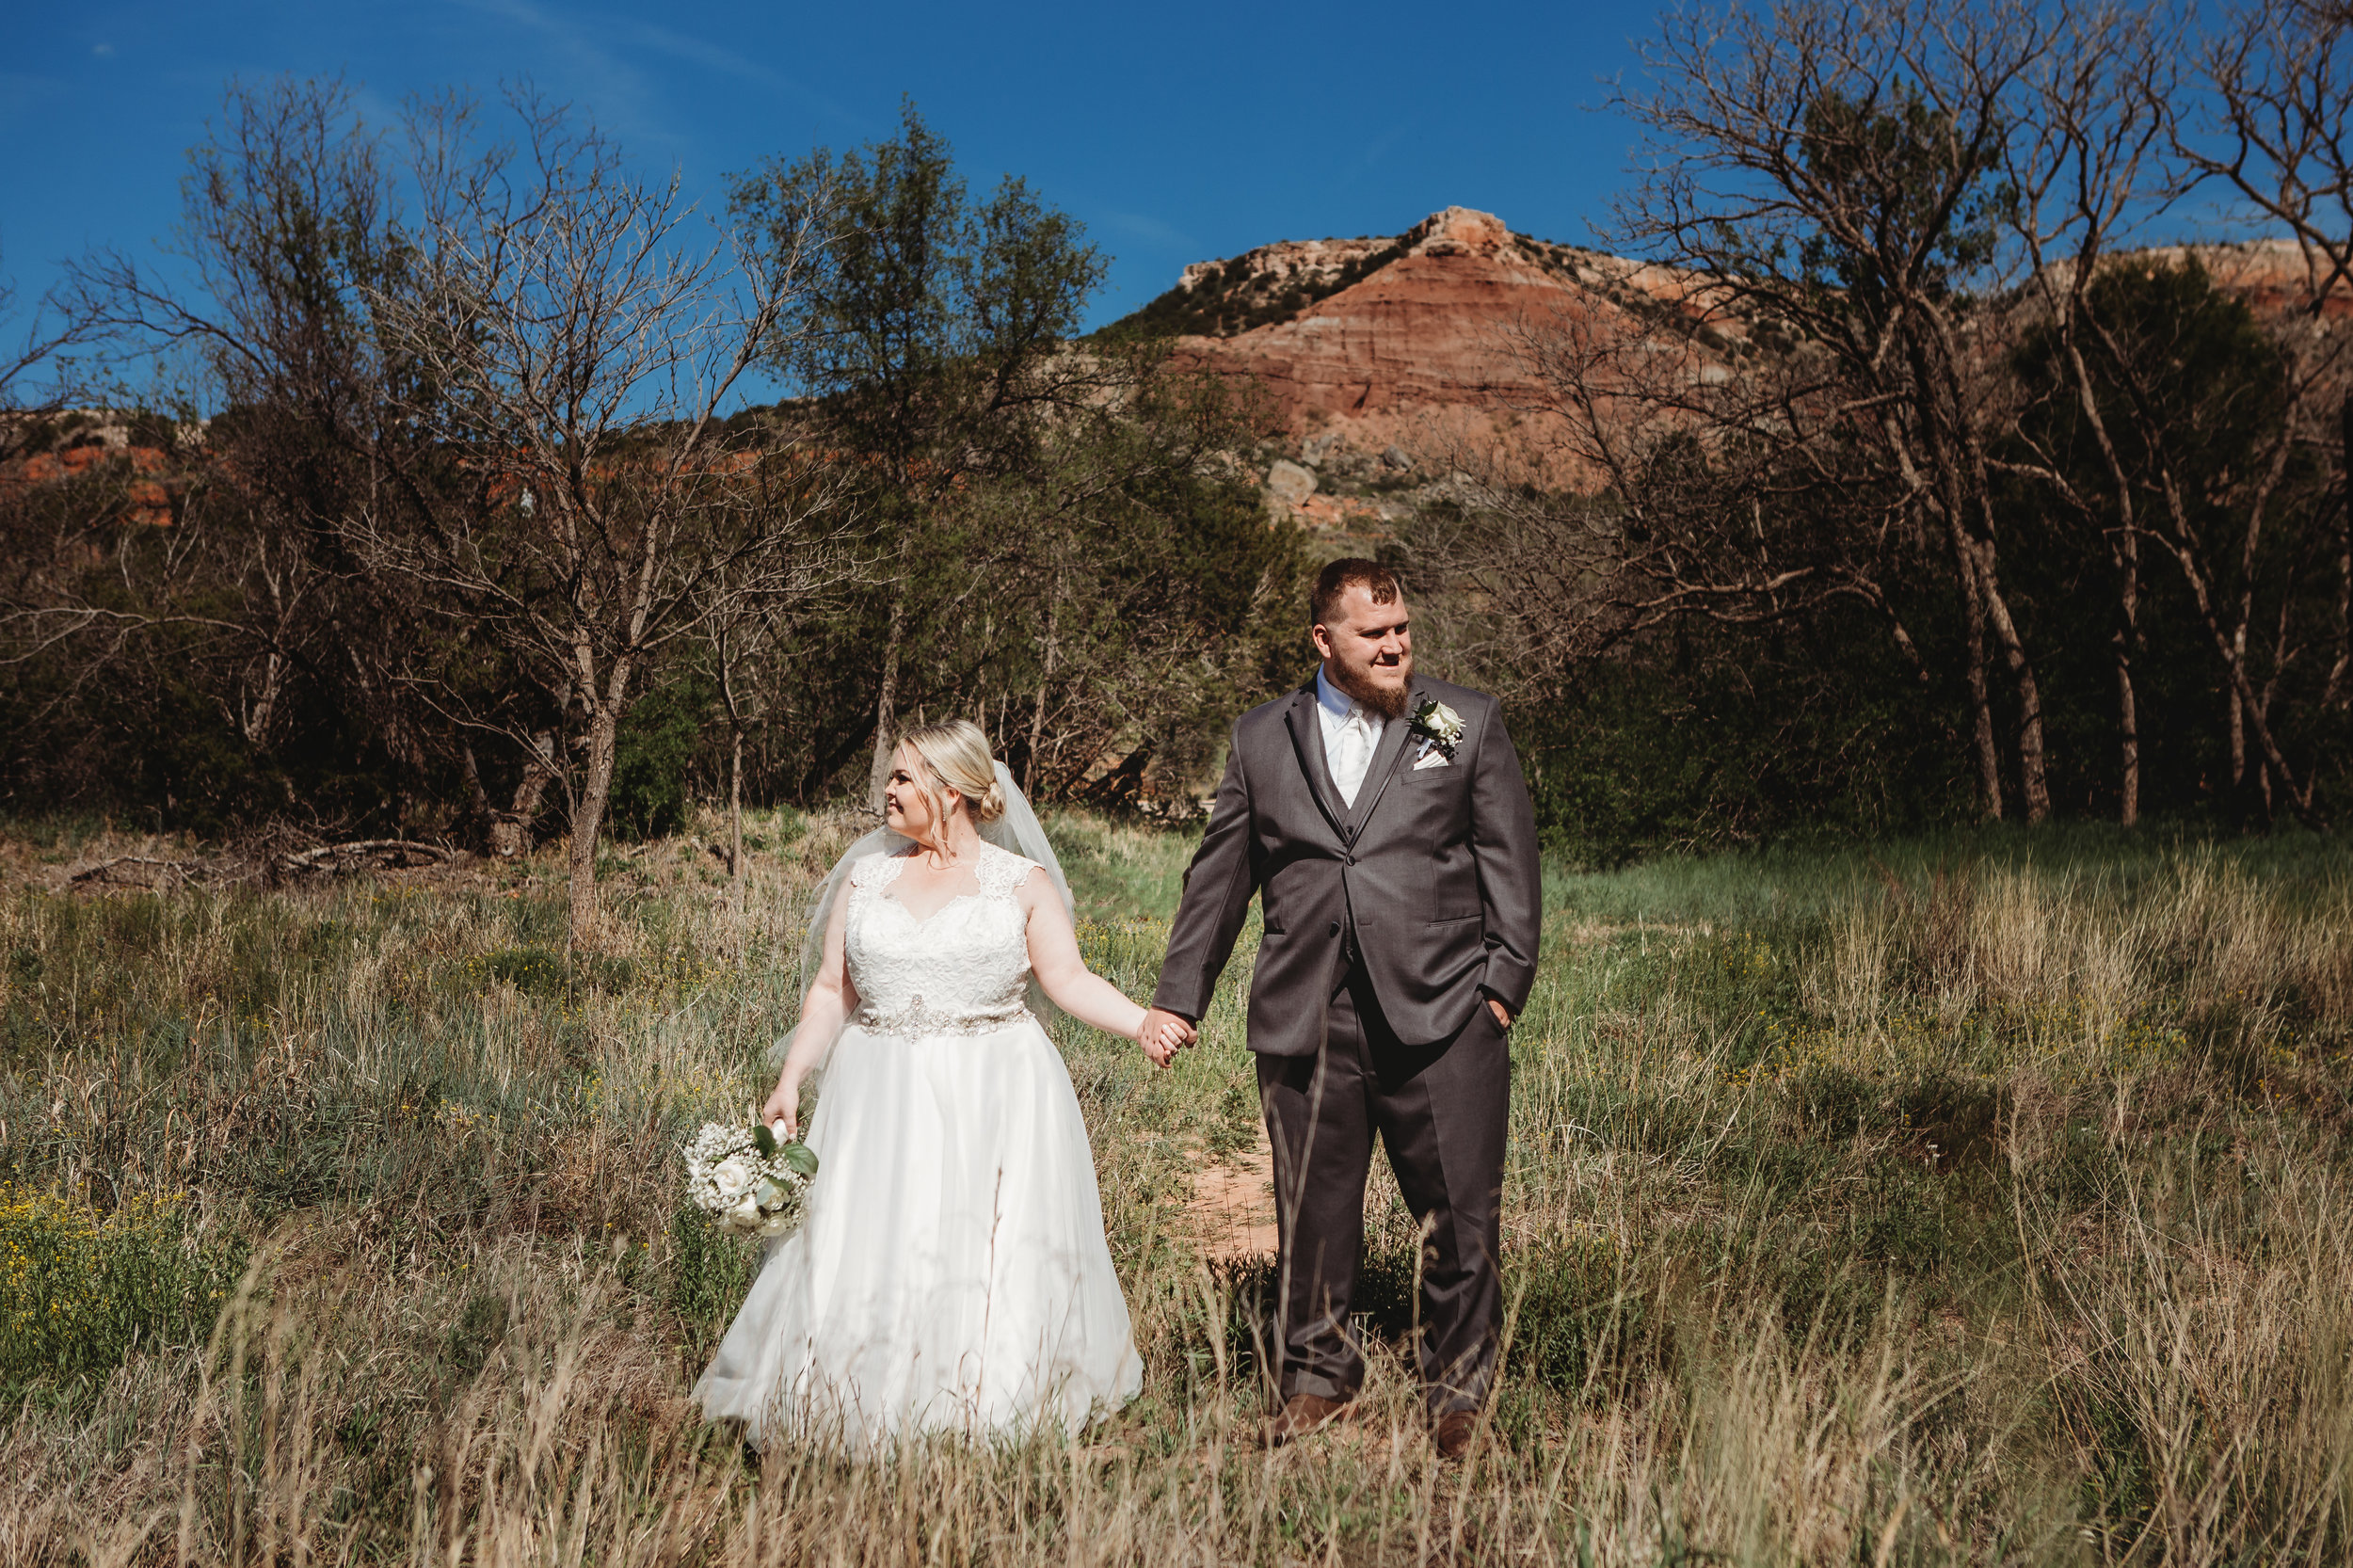  Beautiful skies at Palo Duro Canyon with the bride and groom for portraits before their ceremony #tealawardphotography #texasweddings #amarillophotographer #amarilloweddingphotographer #emotionalphotography #intimateweddingphotography #weddingday #weddingphotos #texasphotographer #inspiredwedding #intimatewedding #weddingformals #bigday #portraits 